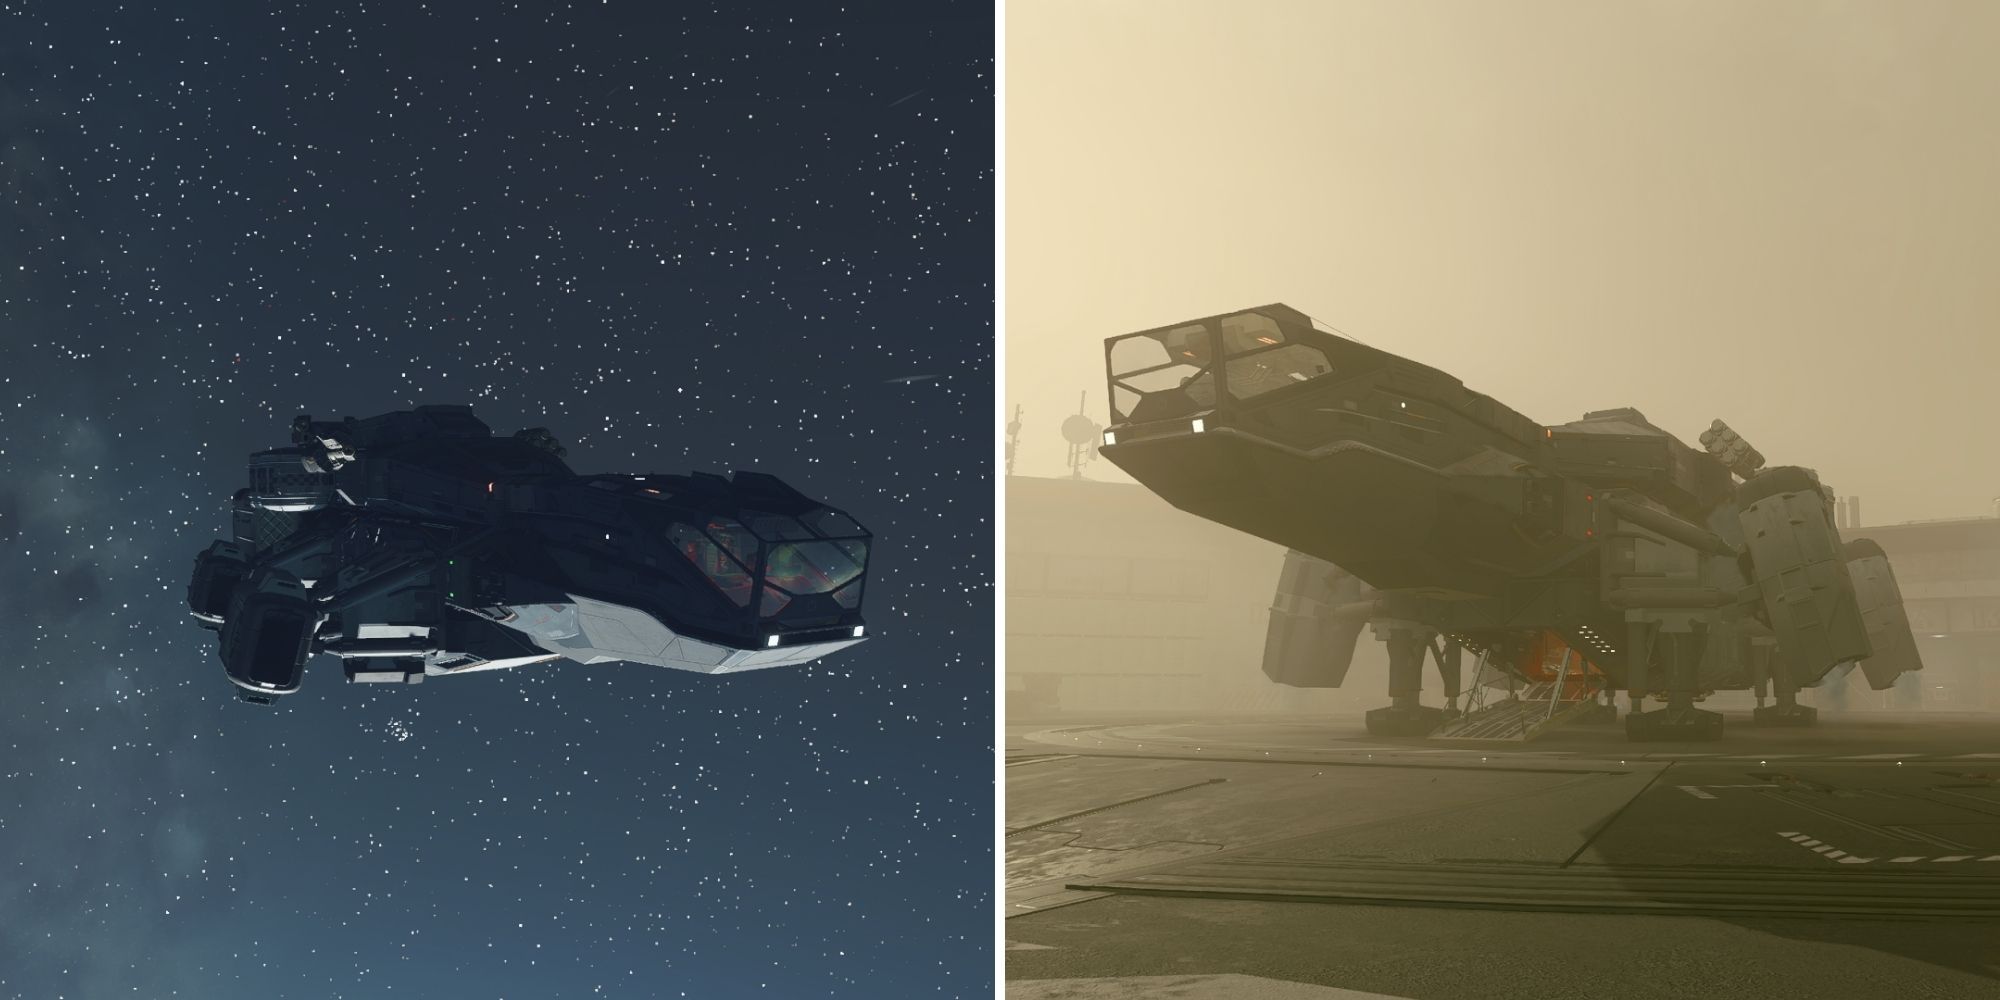 The Player's Ship In Space And At The Landing Pad